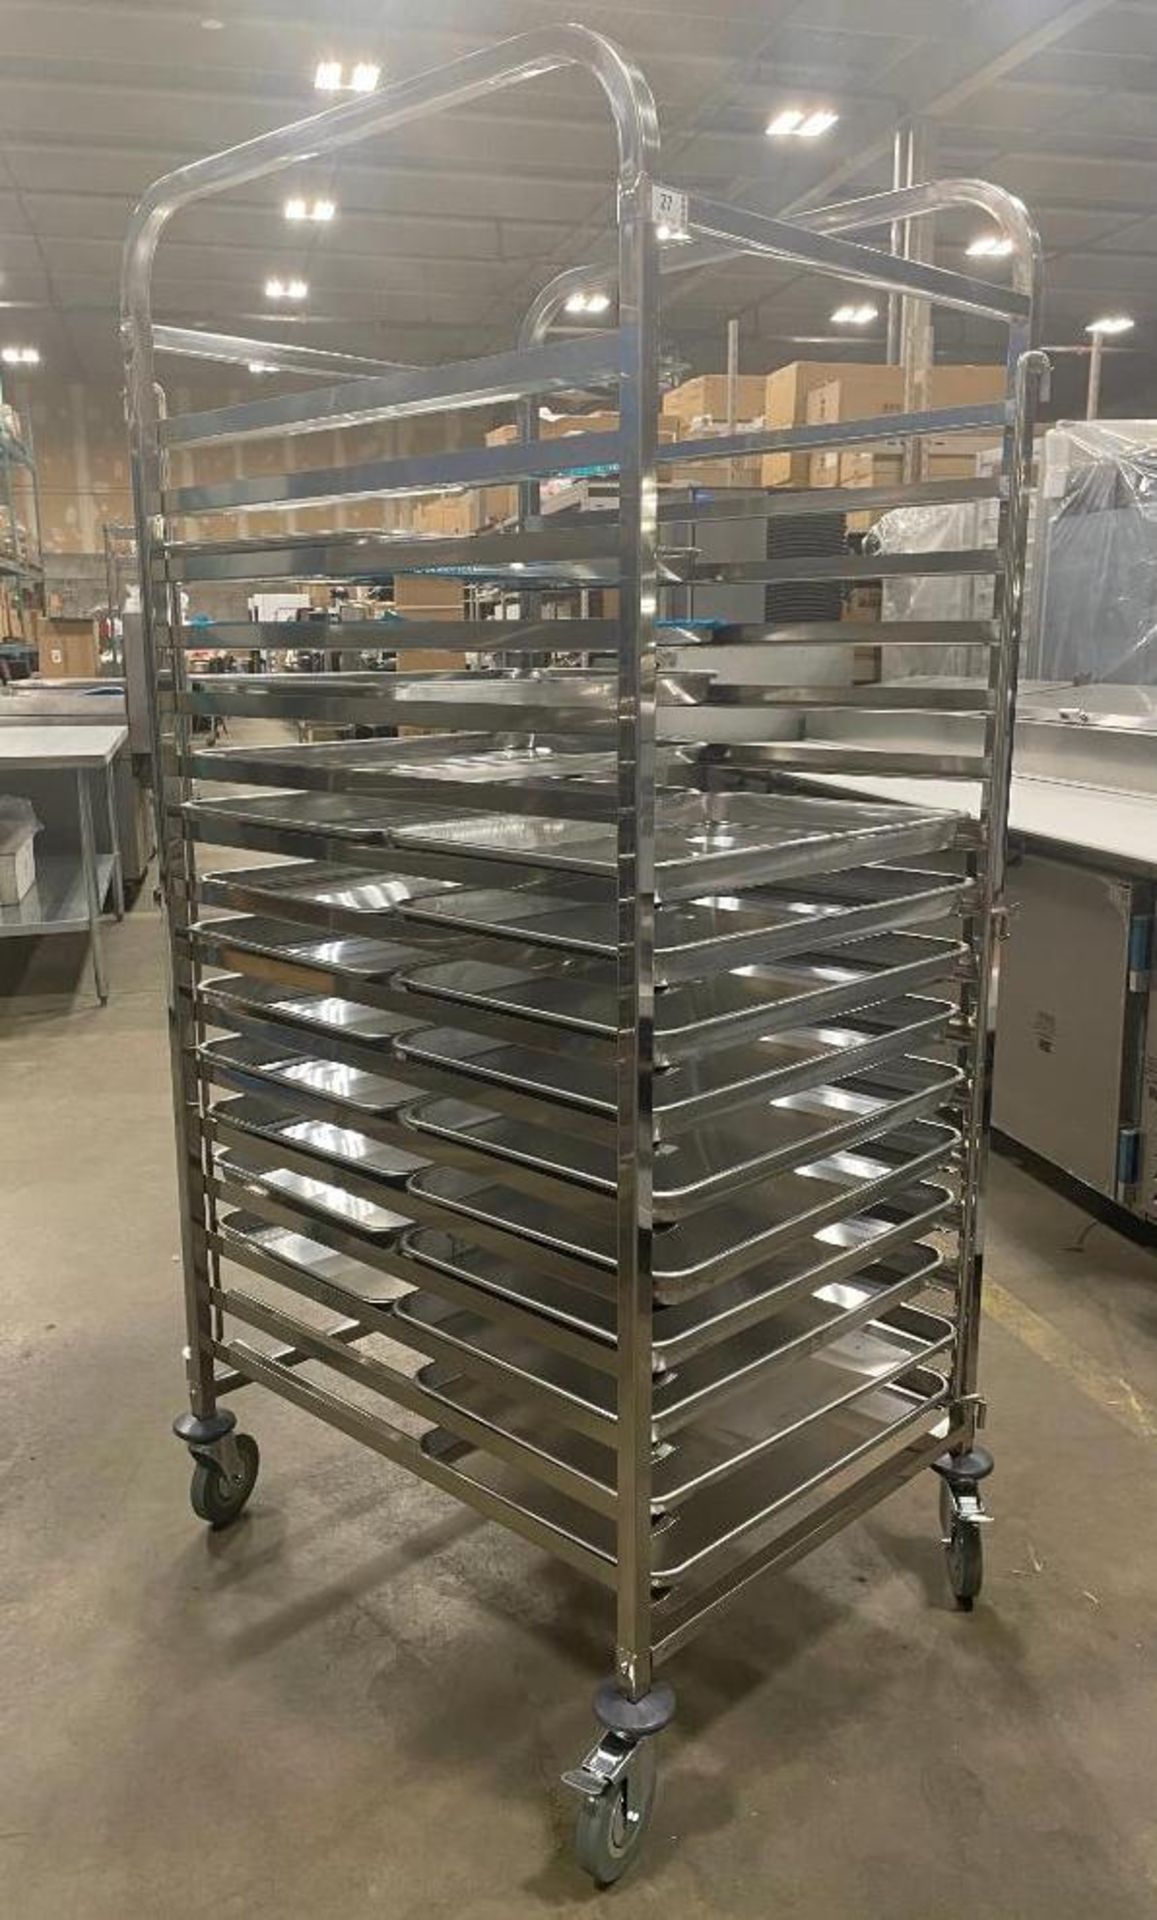 NEW STAINLESS STEEL 16-SLOT OVERSIZED BUN PAN RACK WITH PAN GUARD & (22) PANS - Image 2 of 8